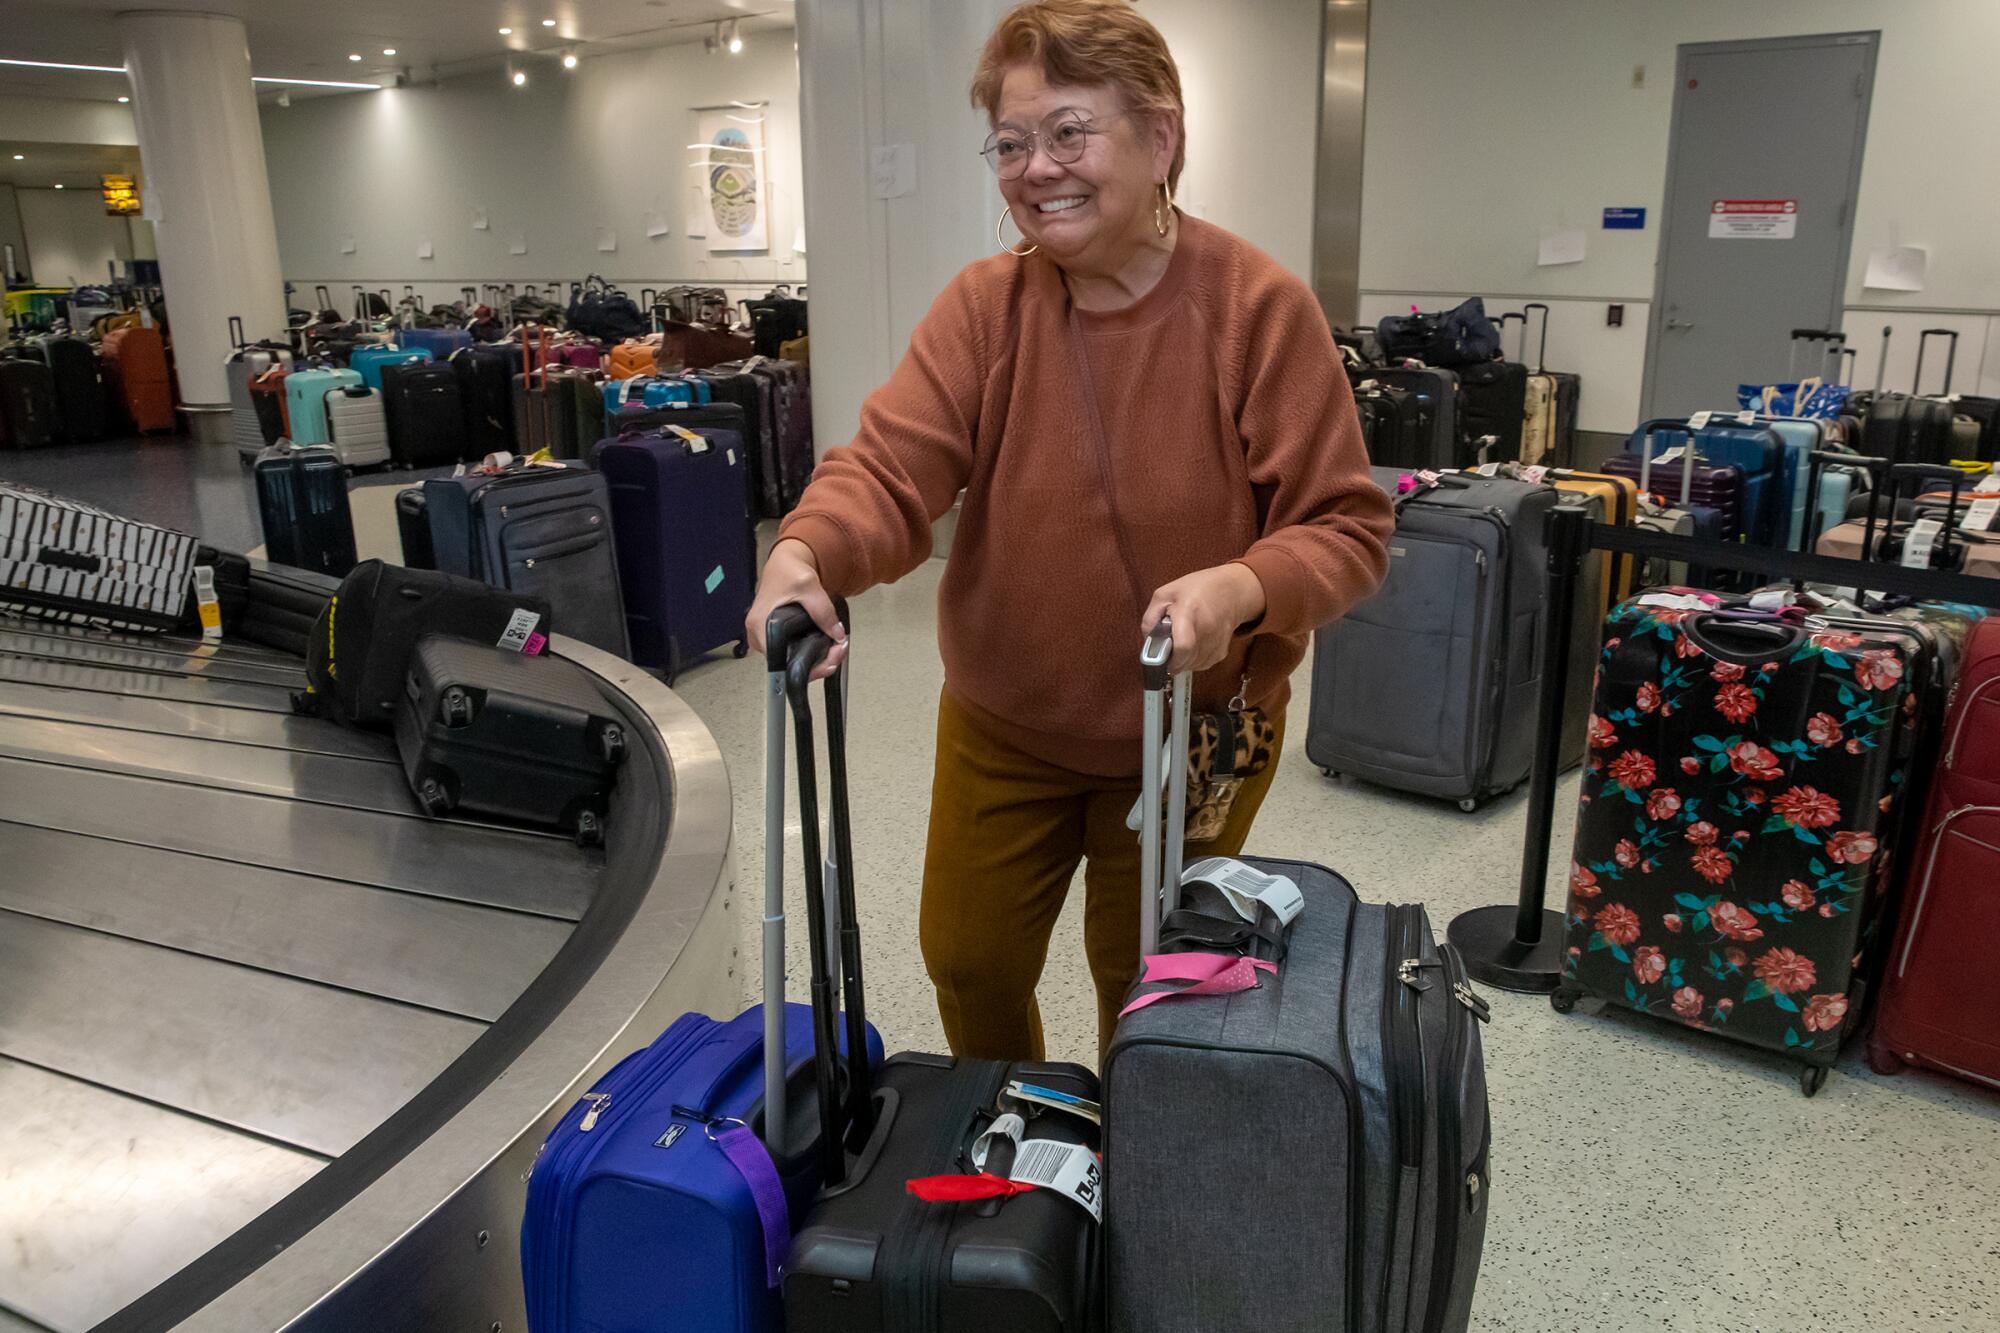 Rosanna Domingo, 68, arrives at LAX on Weednesday after facing Southwest Airlines flight cancellations